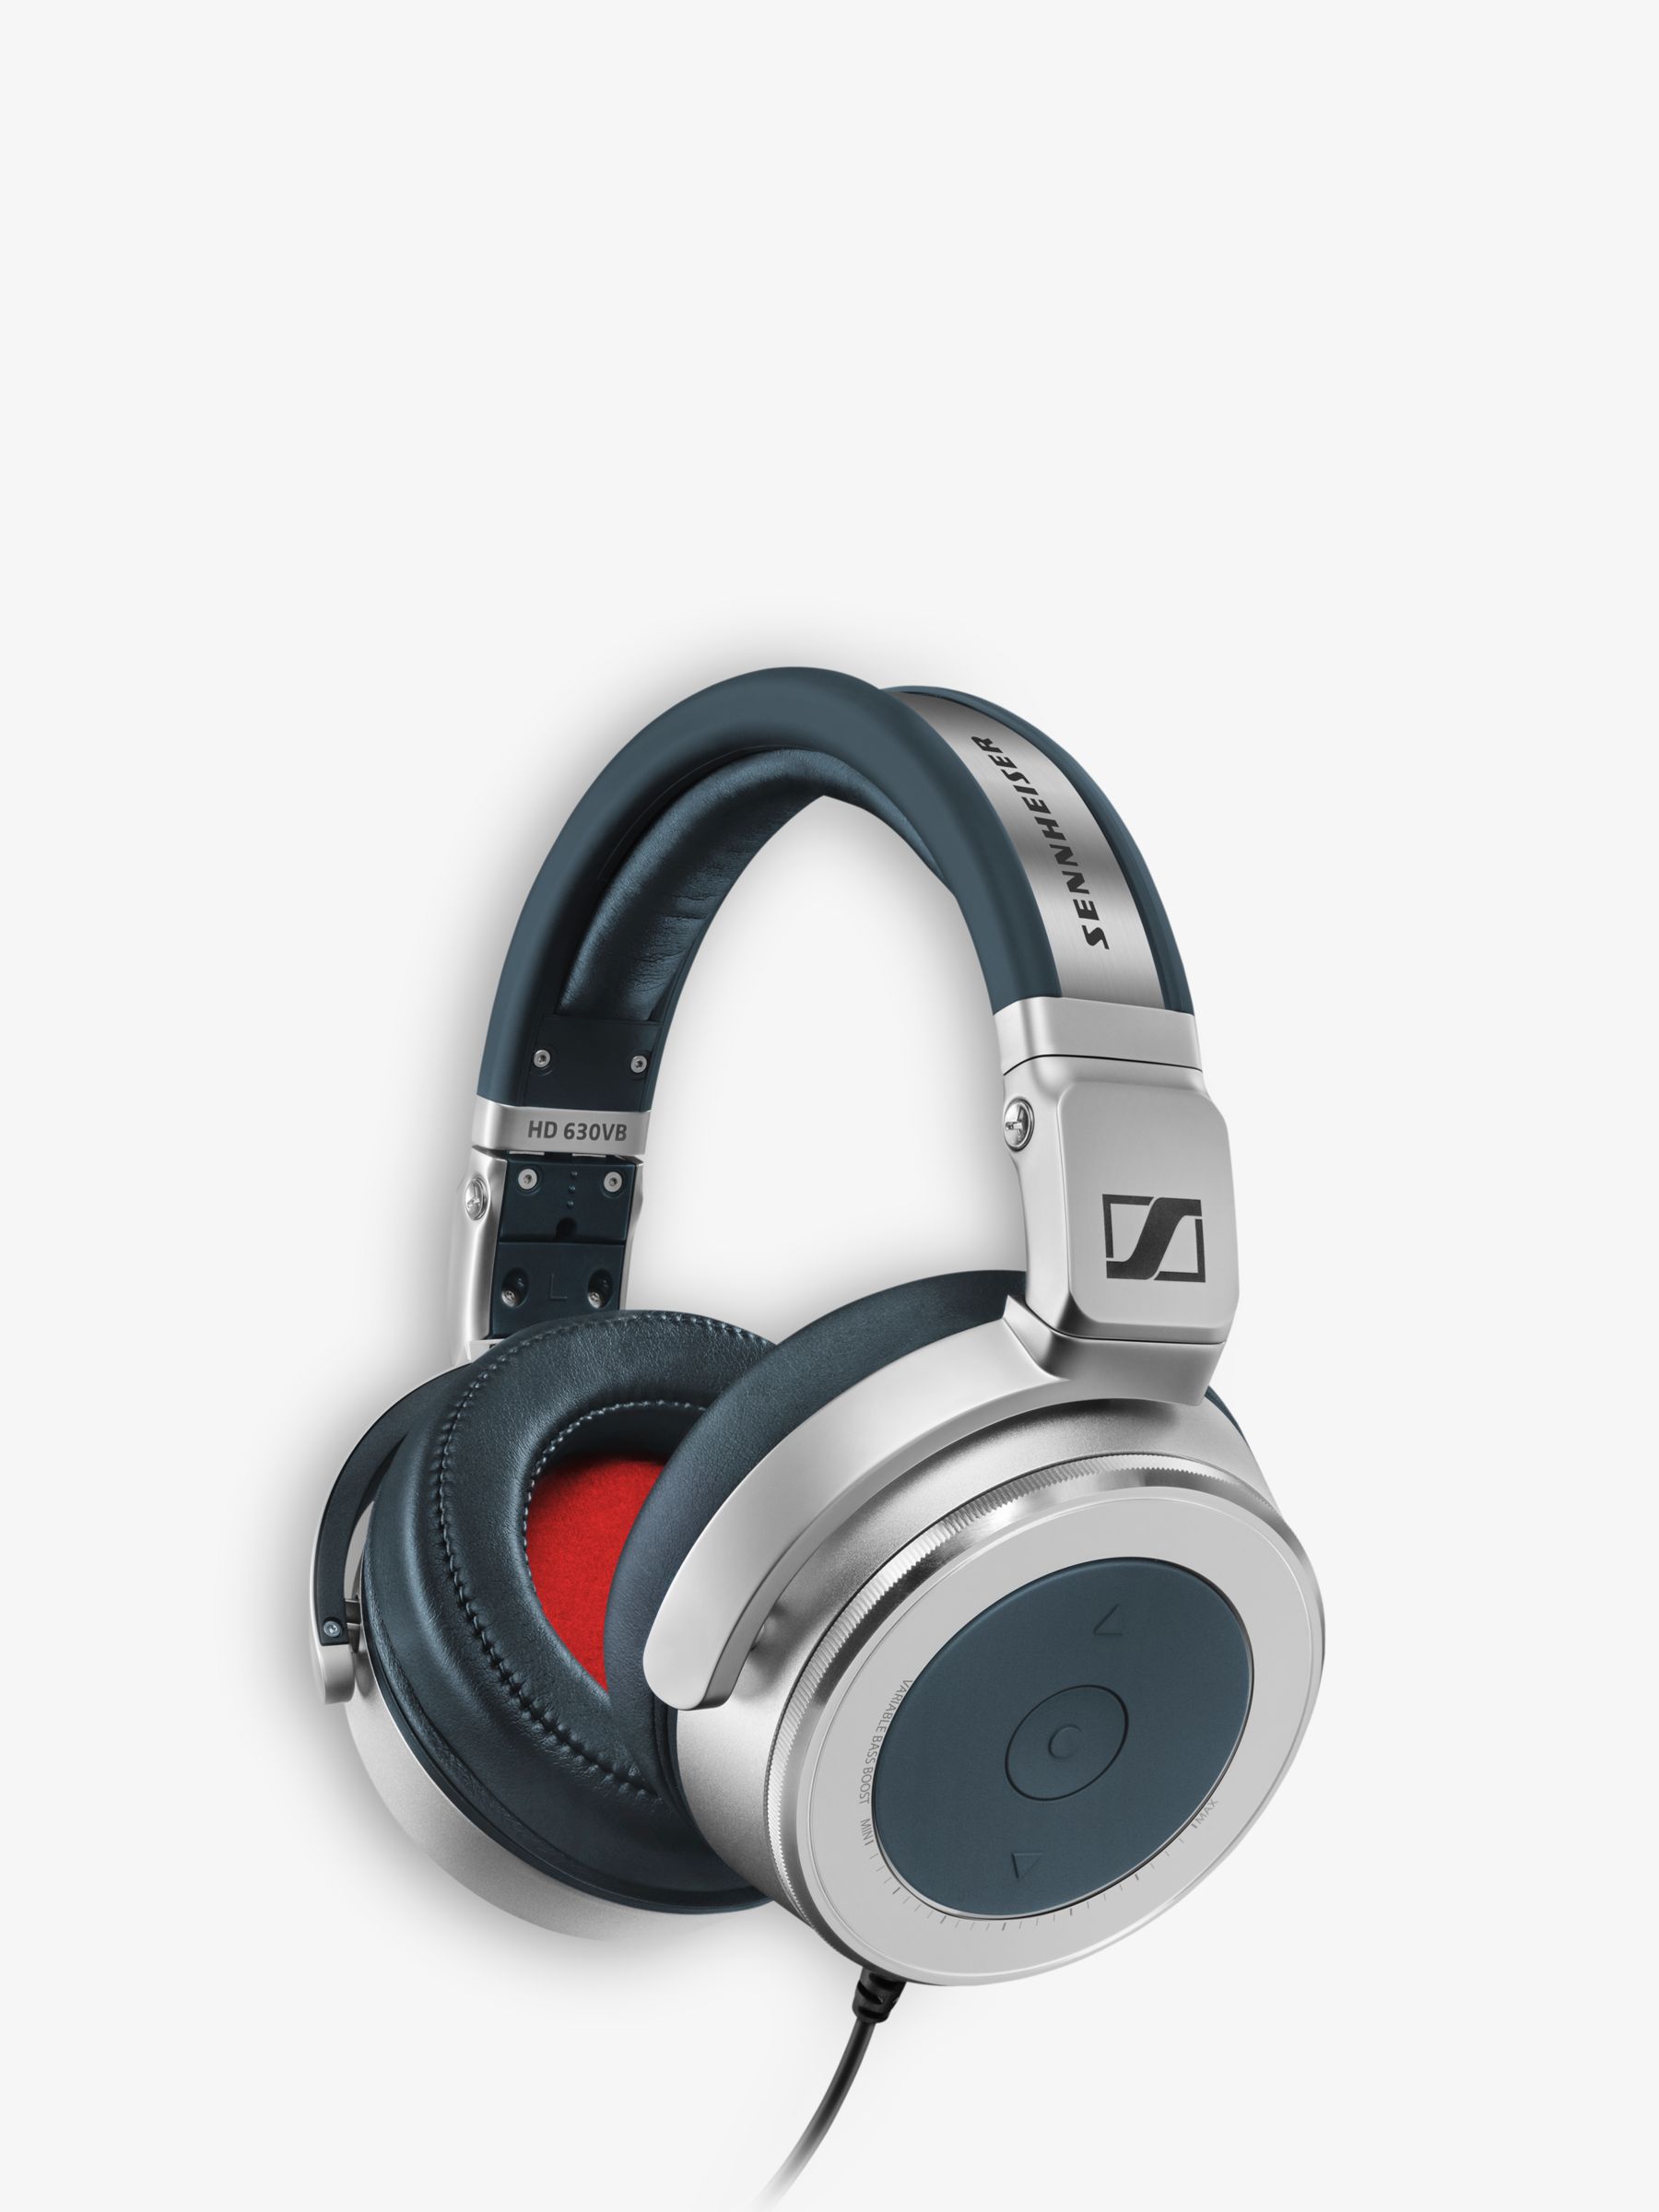 Sennheiser HD 630VB Full-Size Headphones with Ear Cup Control Functions and In-Line Microphone